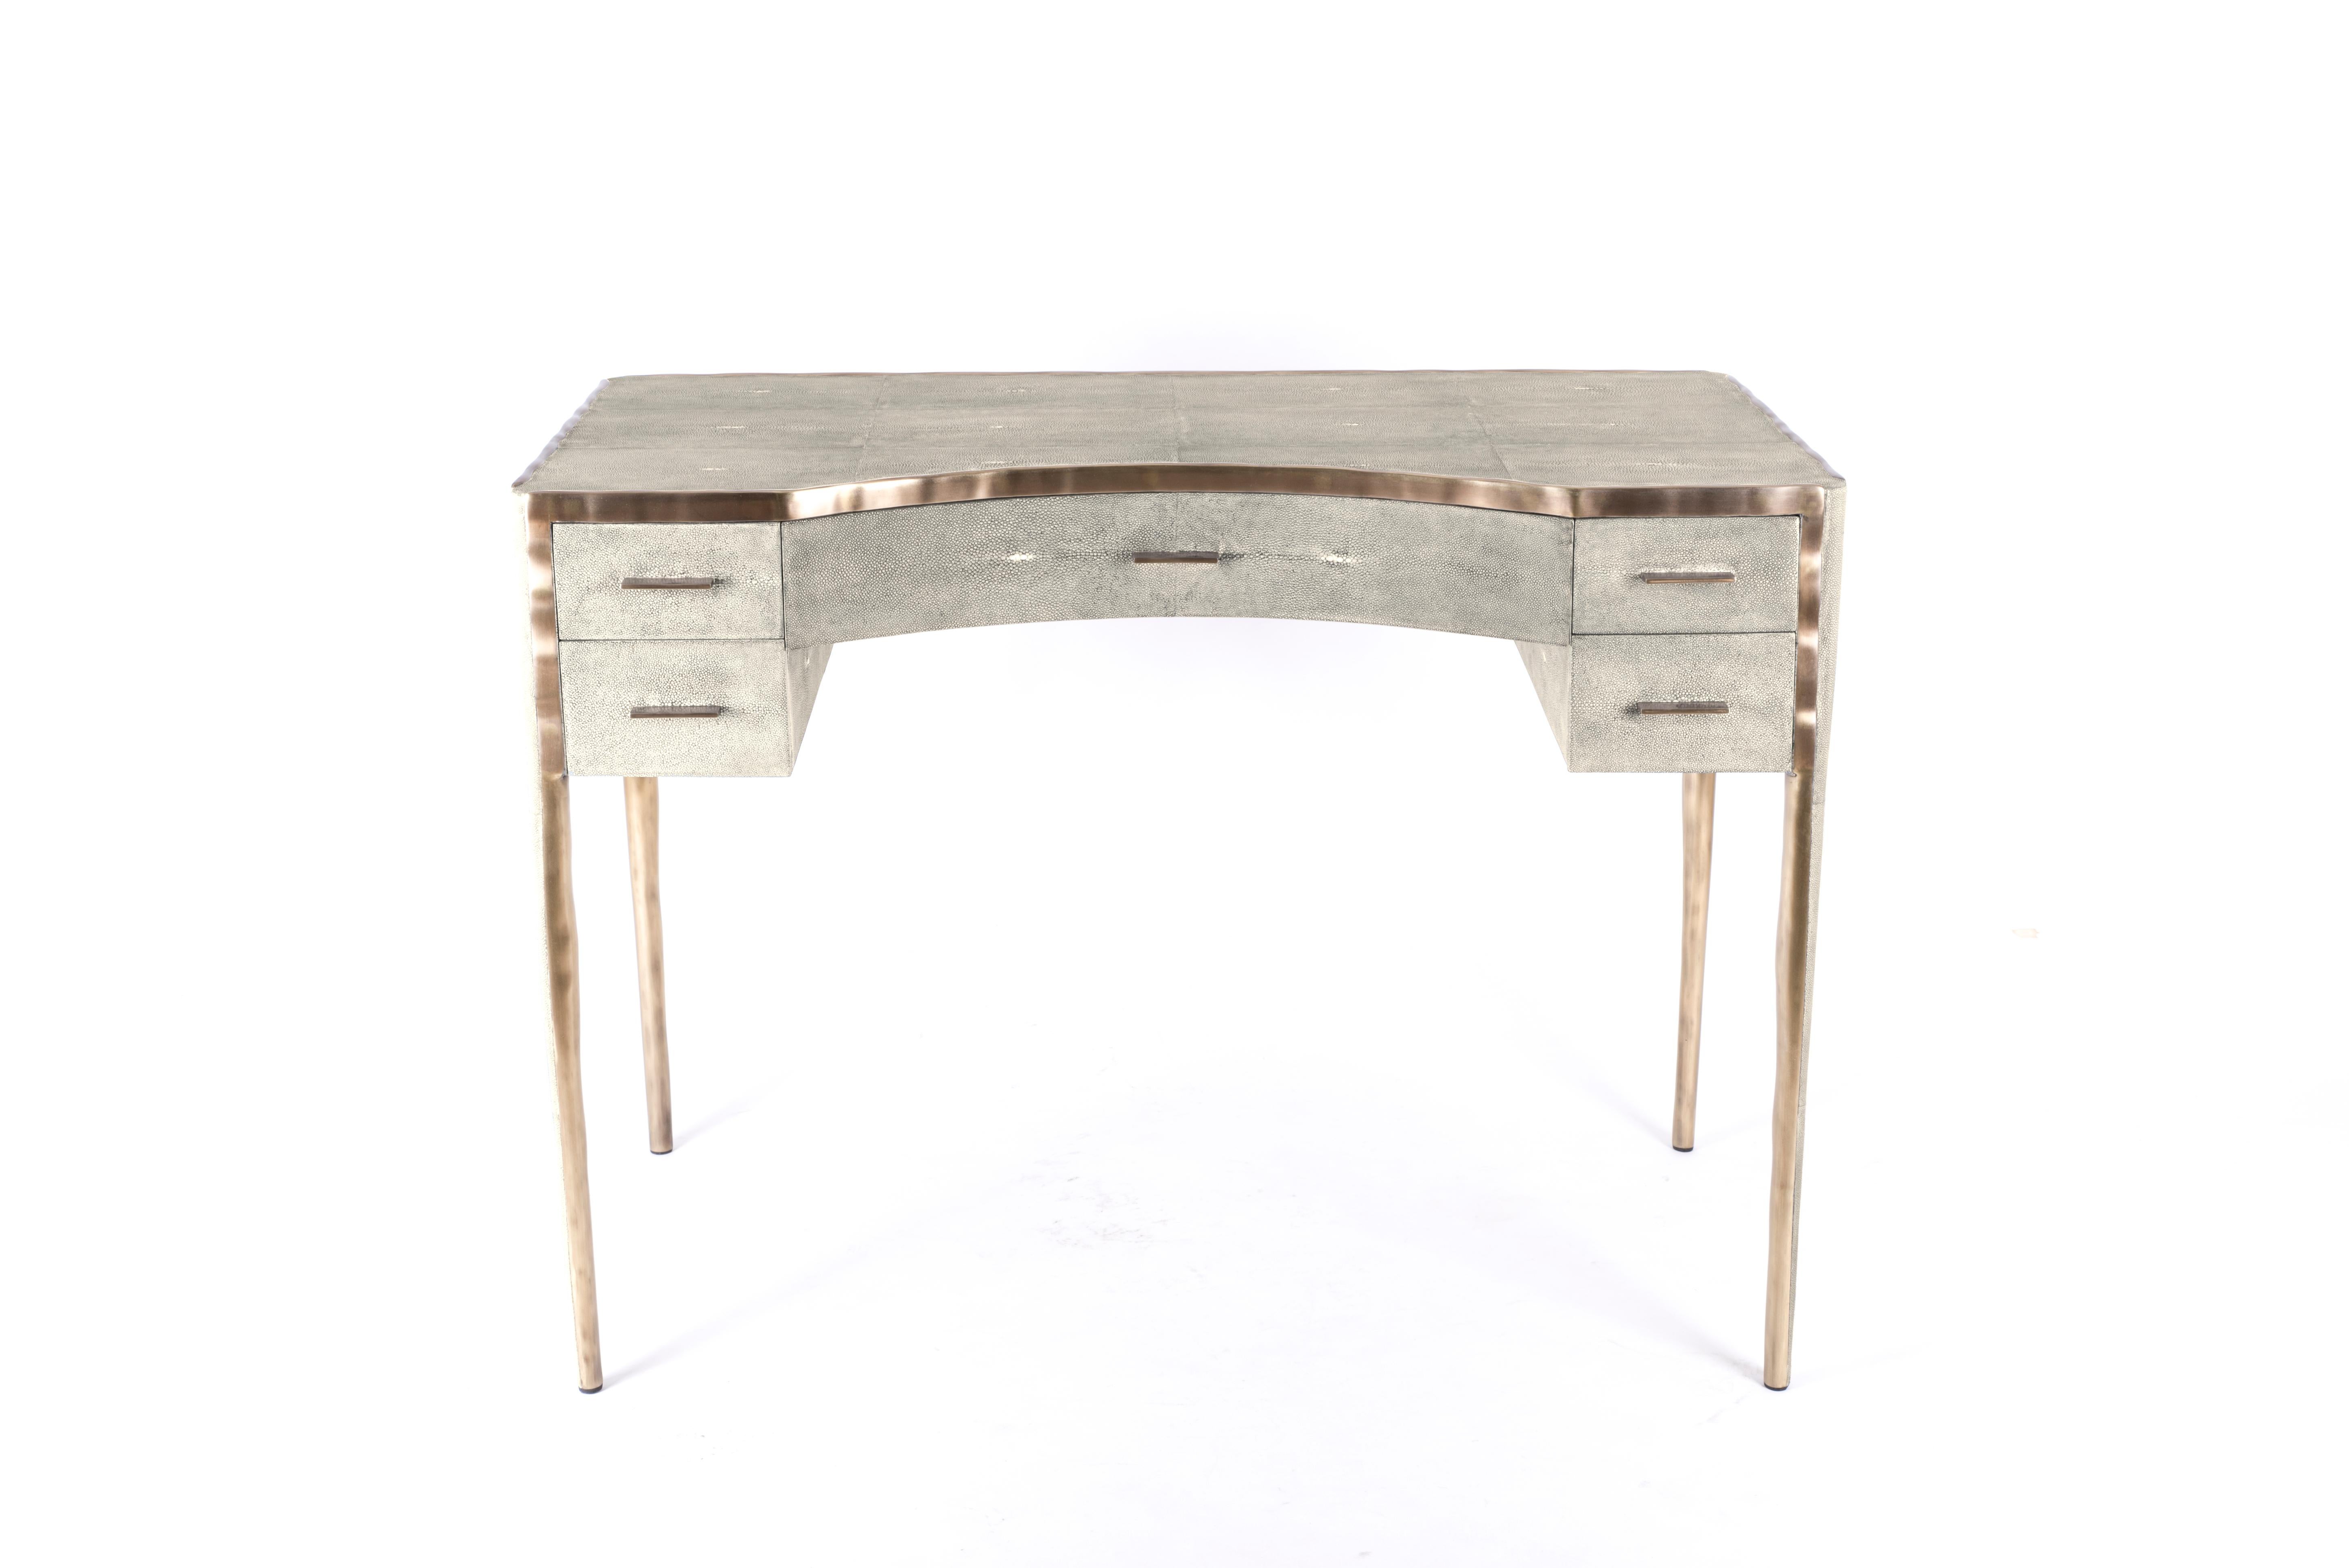 The melting vanity table's simple but elegant design, makes for an adaptable elegant piece of furniture. The cream parchment inlaid surface is framed with an irregular surface bronze-patina brass that creates the 